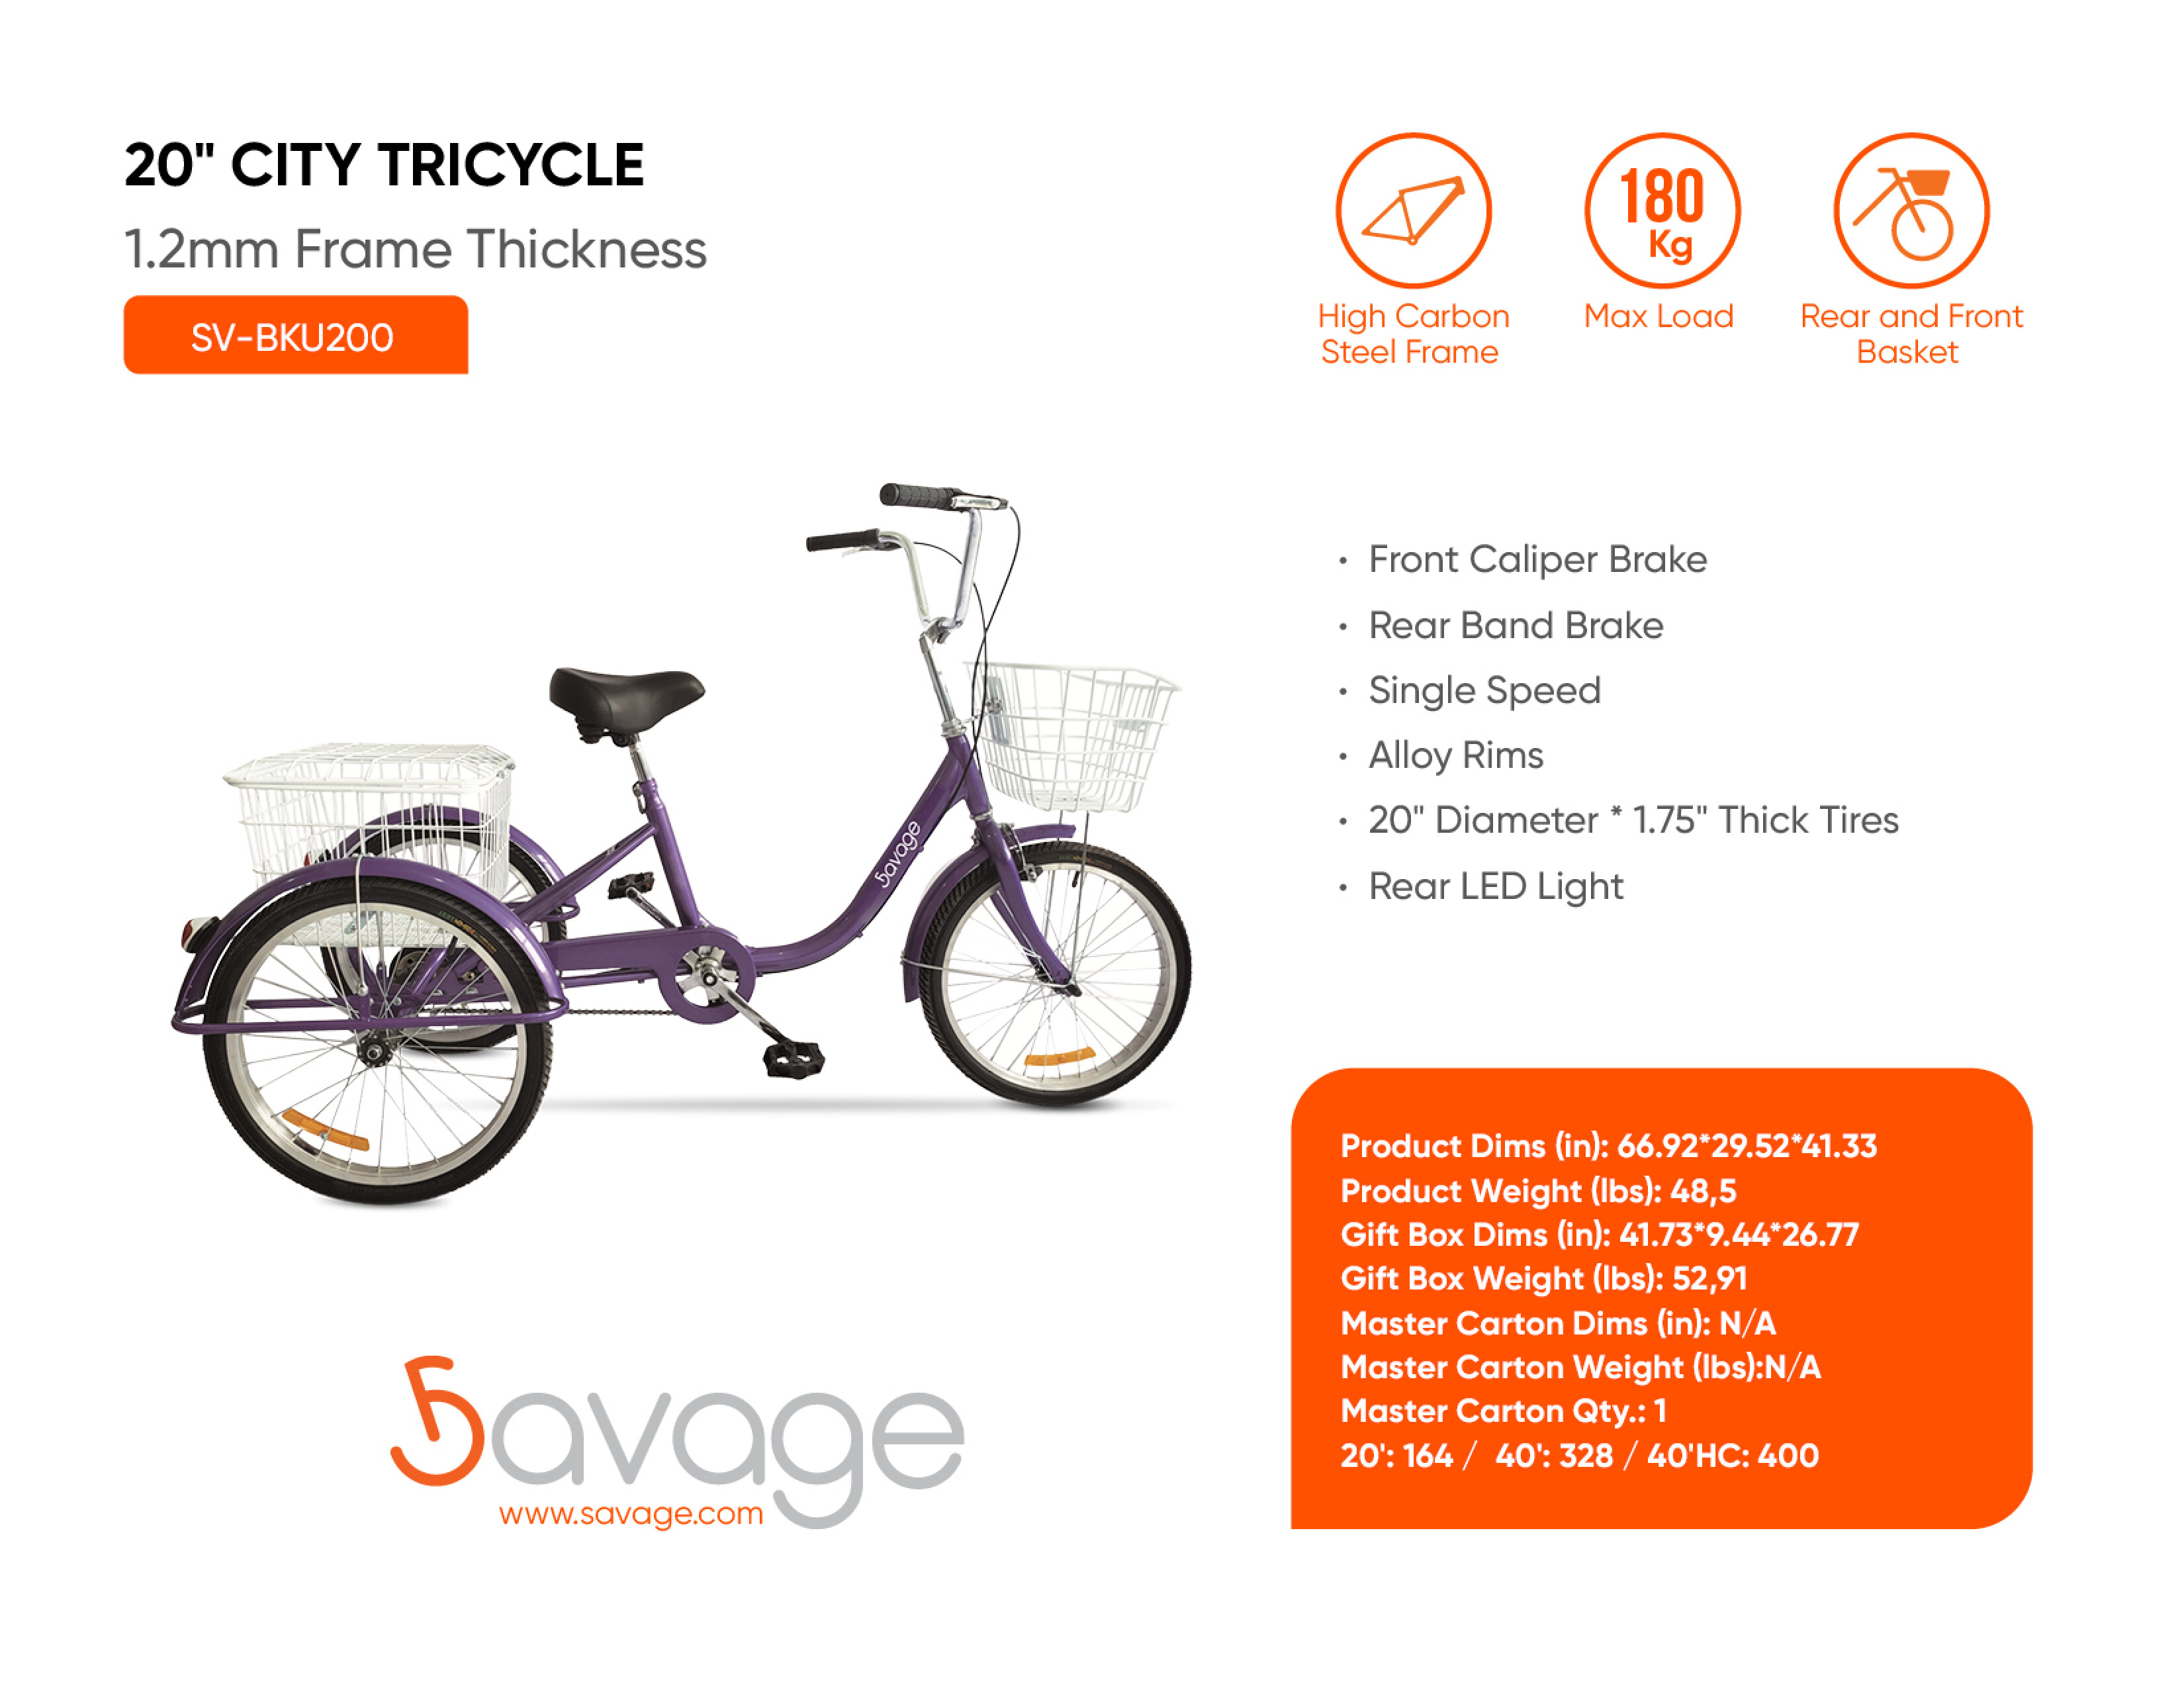 20" City Tricycle